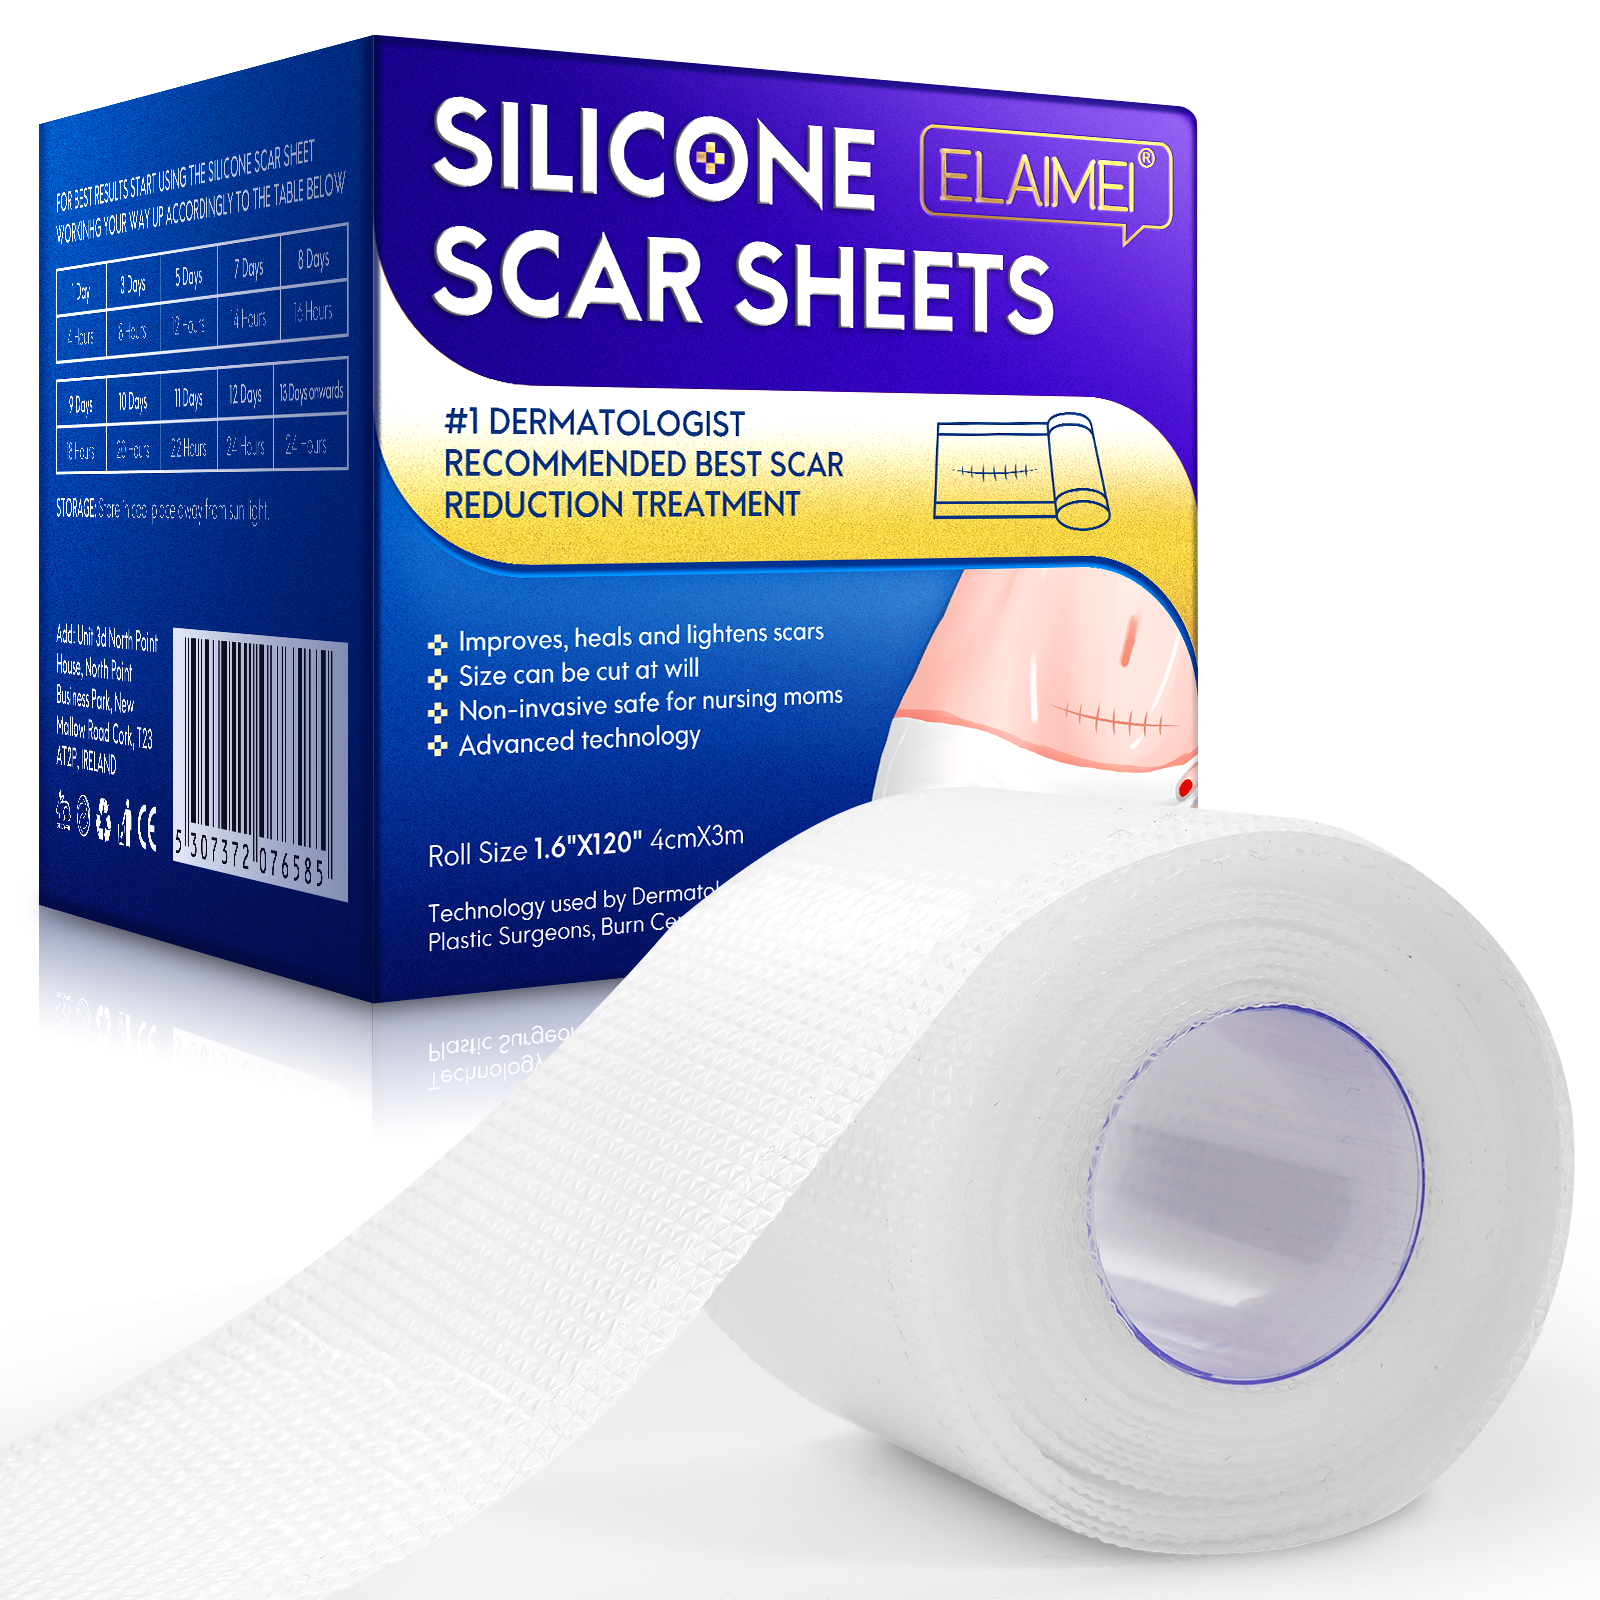 Scar Fx Silicone Sheeting - Prevent and Manage Problem Scarring